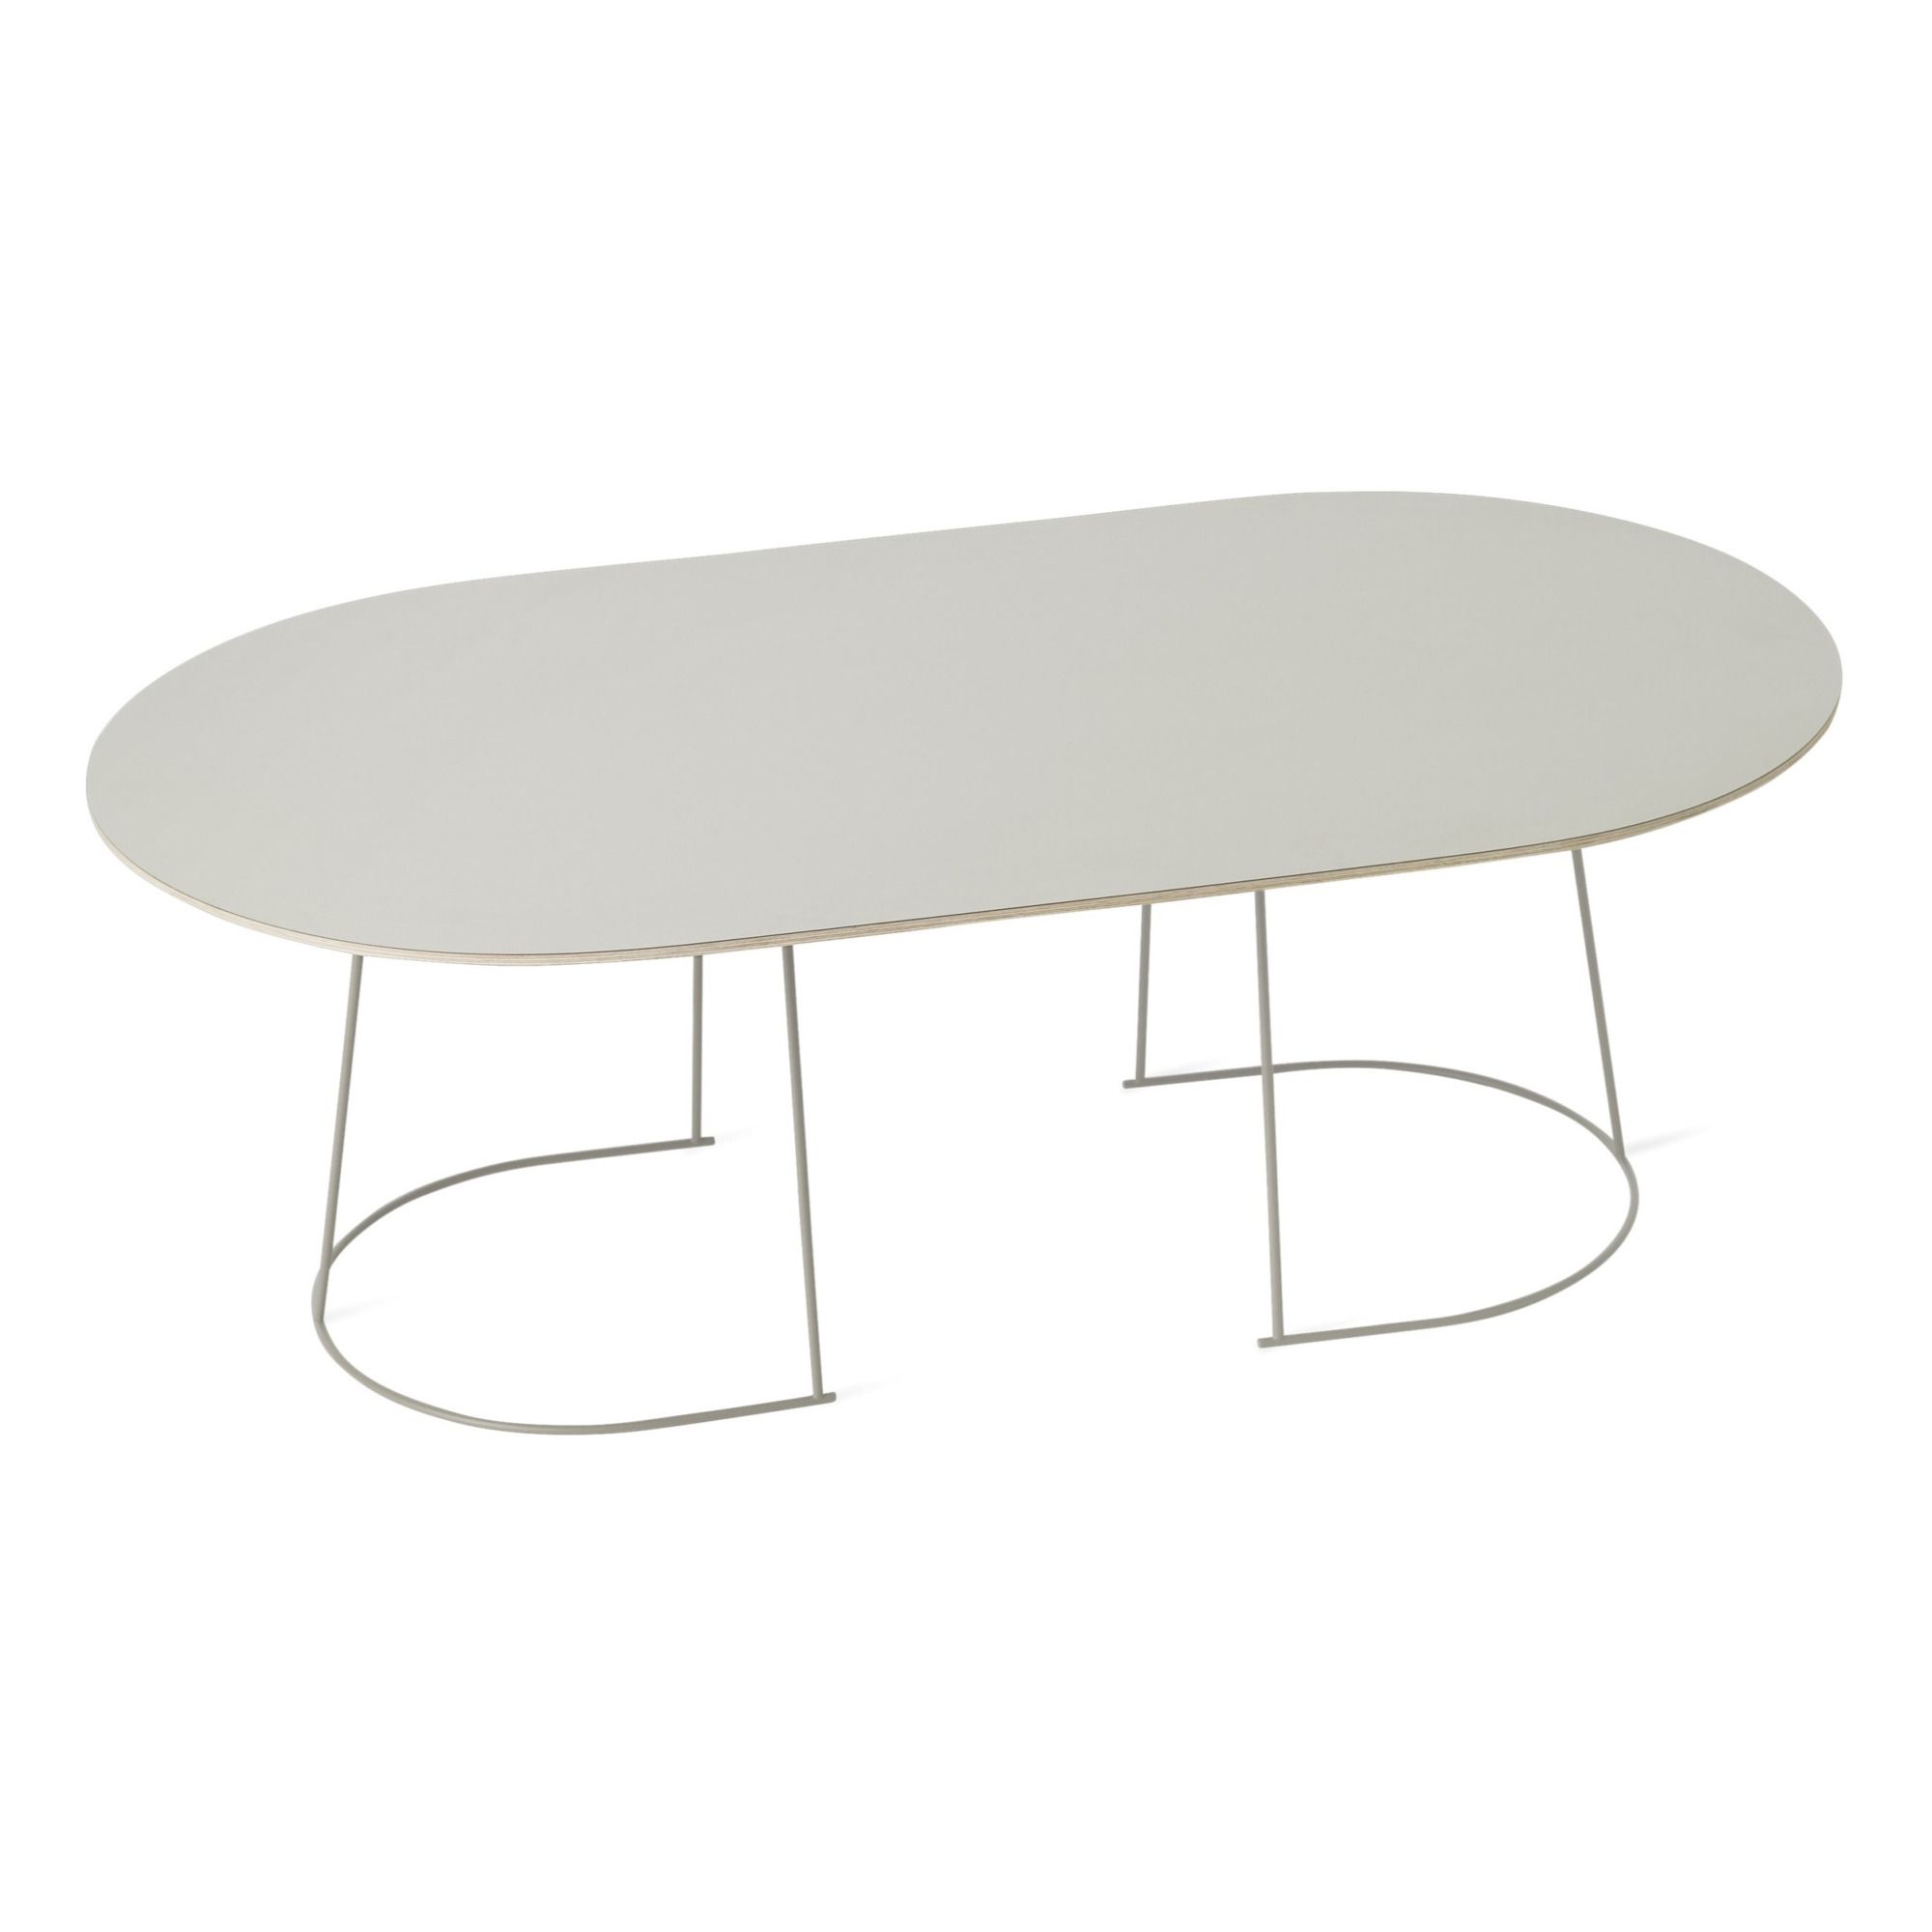 Muuto - Table basse Airy - Gris